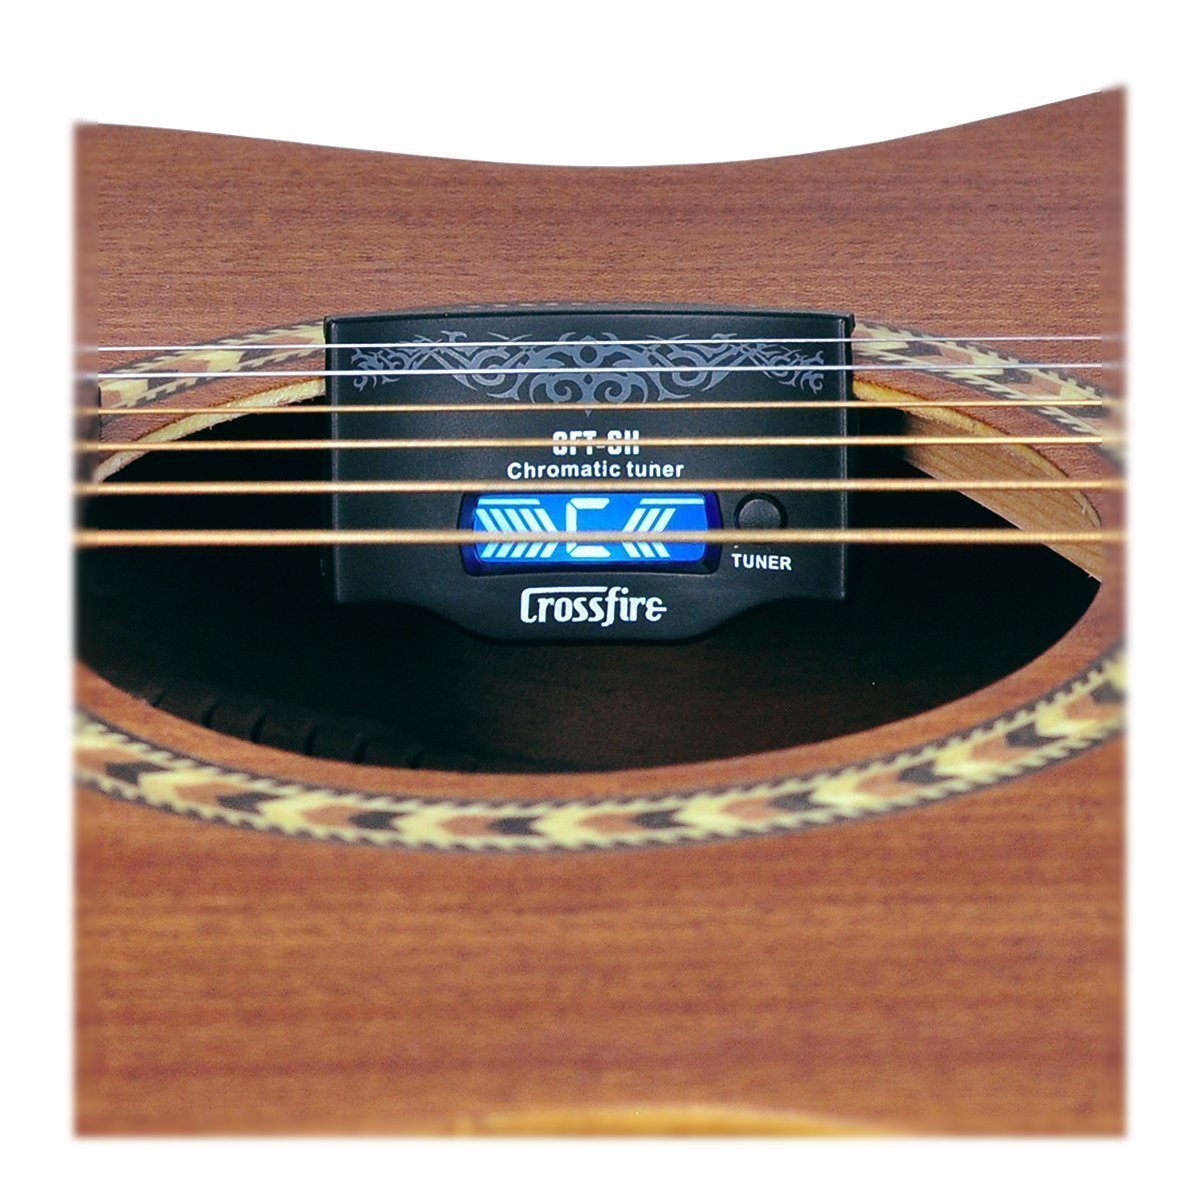 Crossfire Sound Hole-Mounted Chromatic Tuner with Built-in Microphone